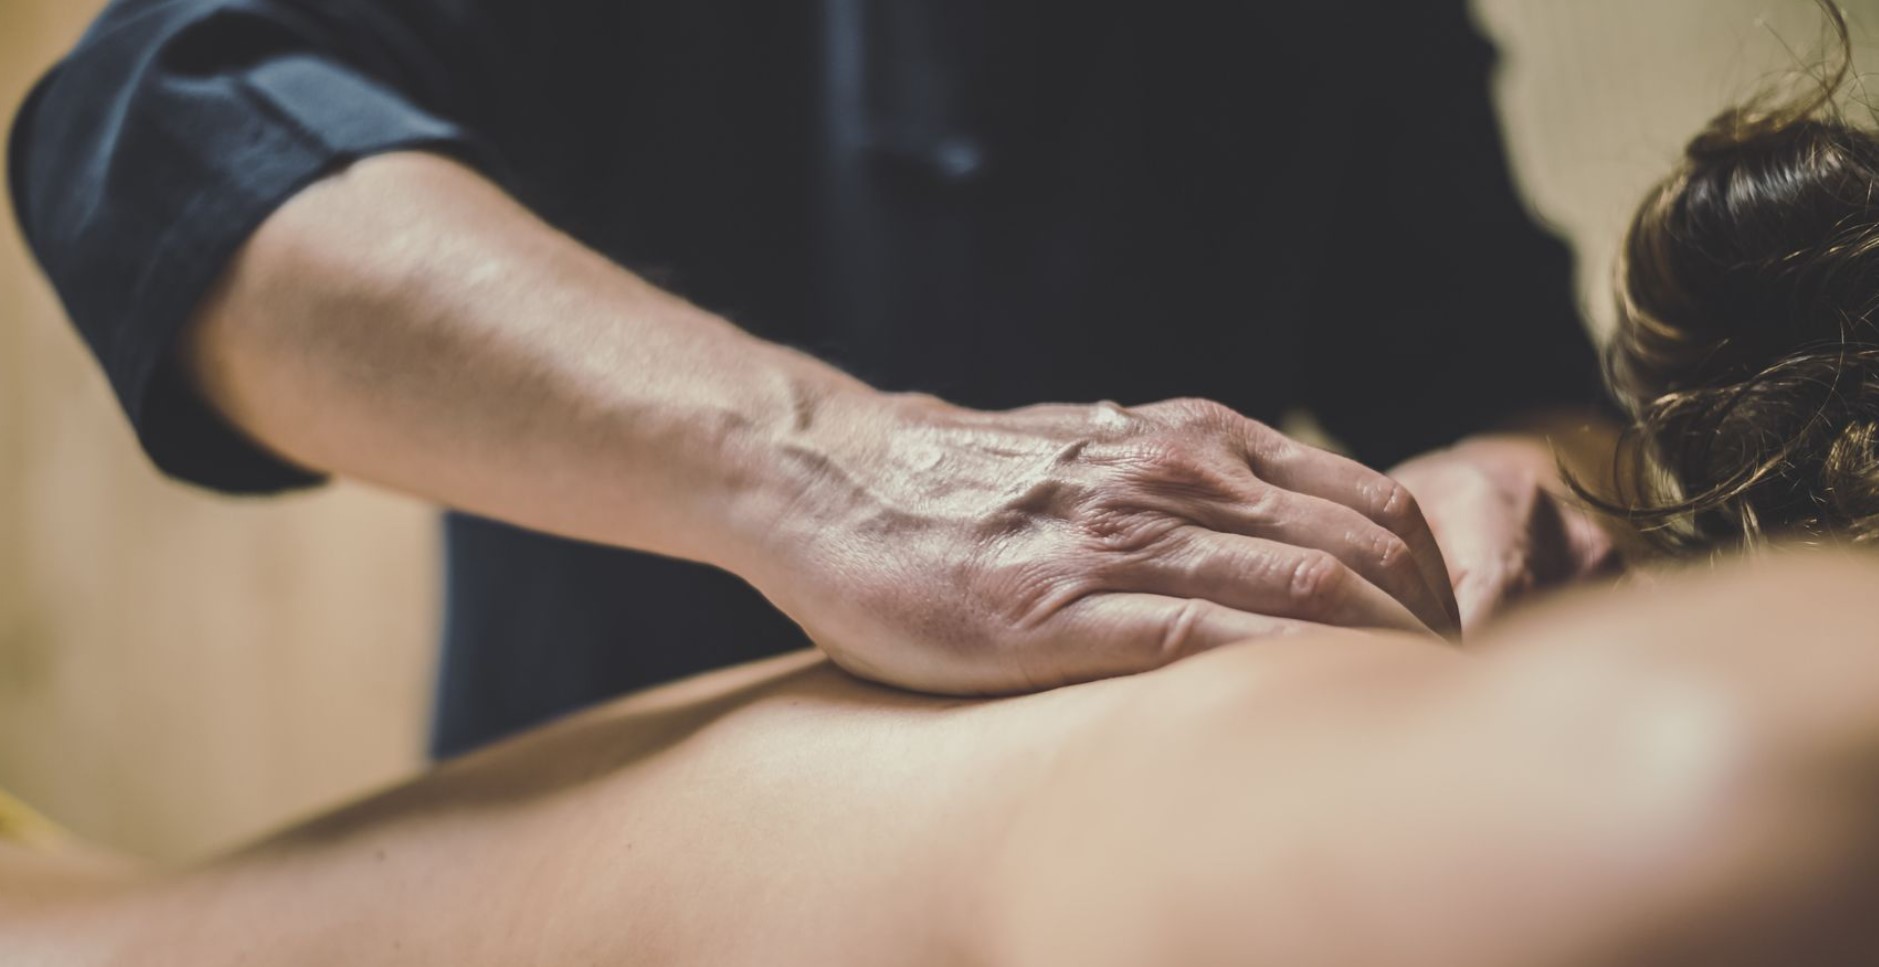 Happy Ending Massage: A Closer Look at the Legal and Ethical Aspects